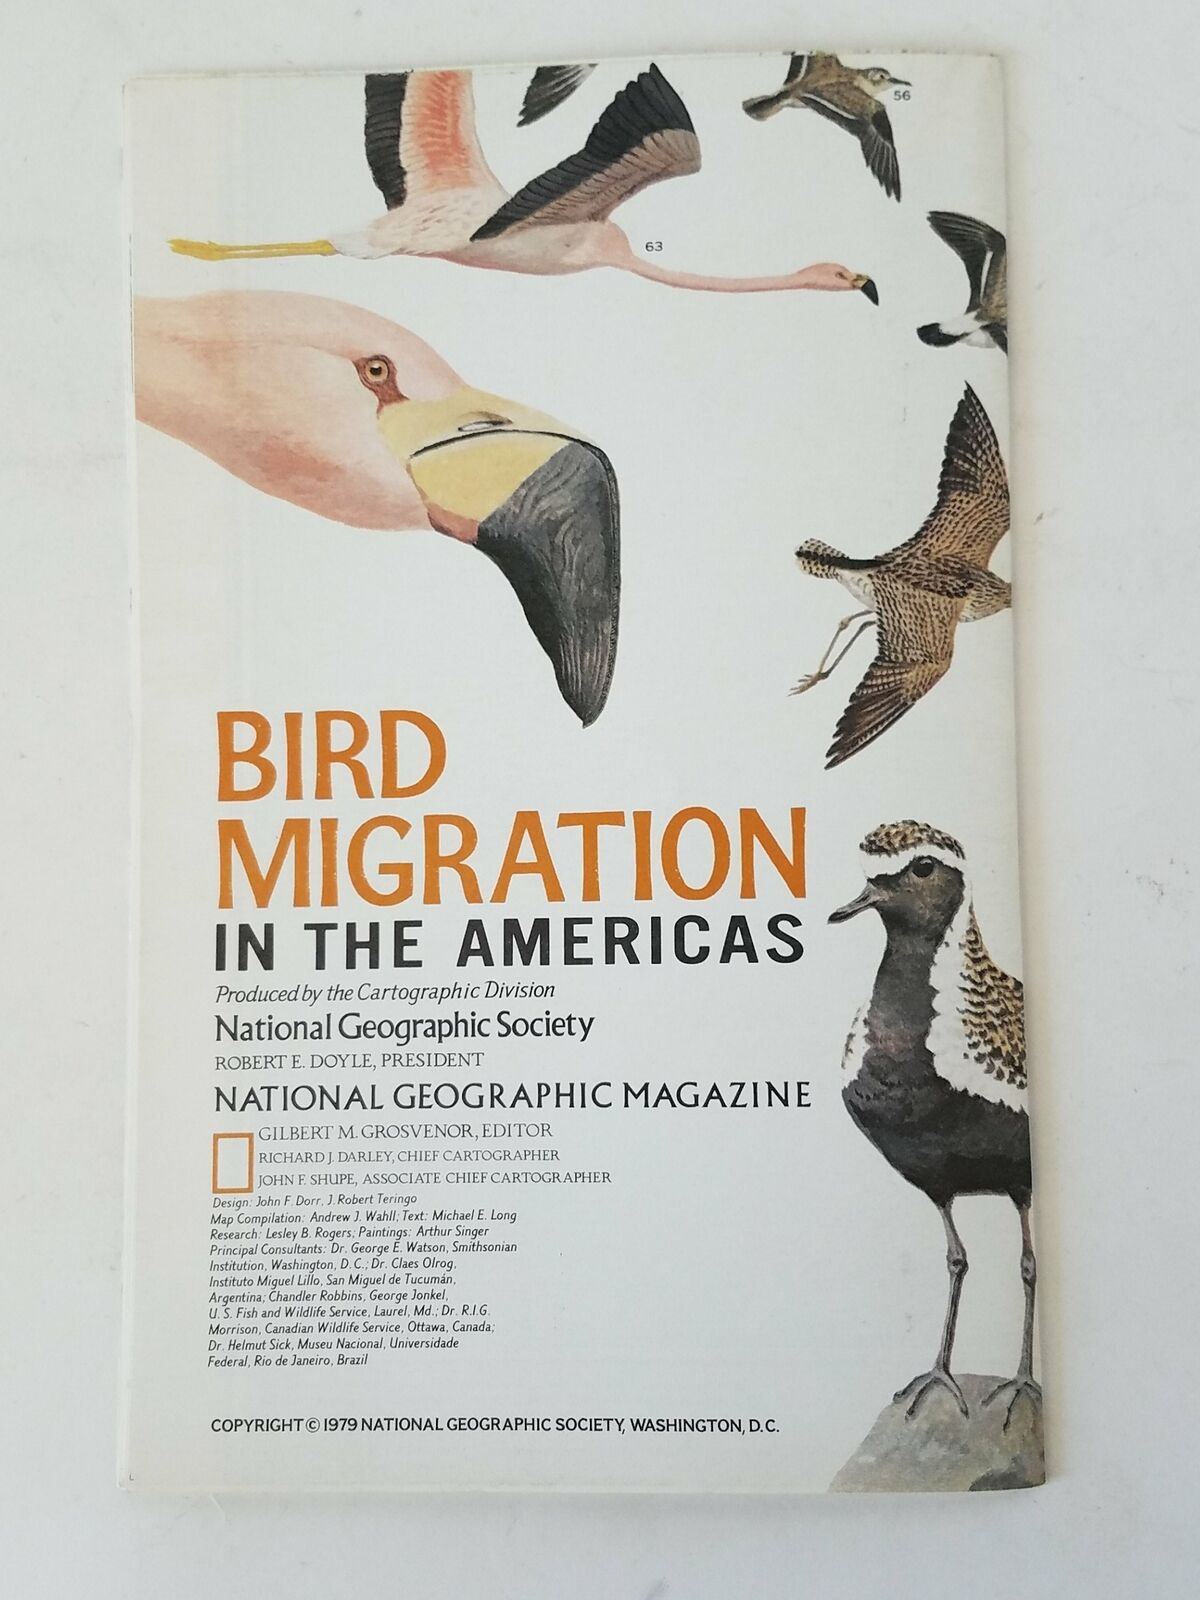 National Geographic Magazine Issue August 1979 Bird Migration in The Americas